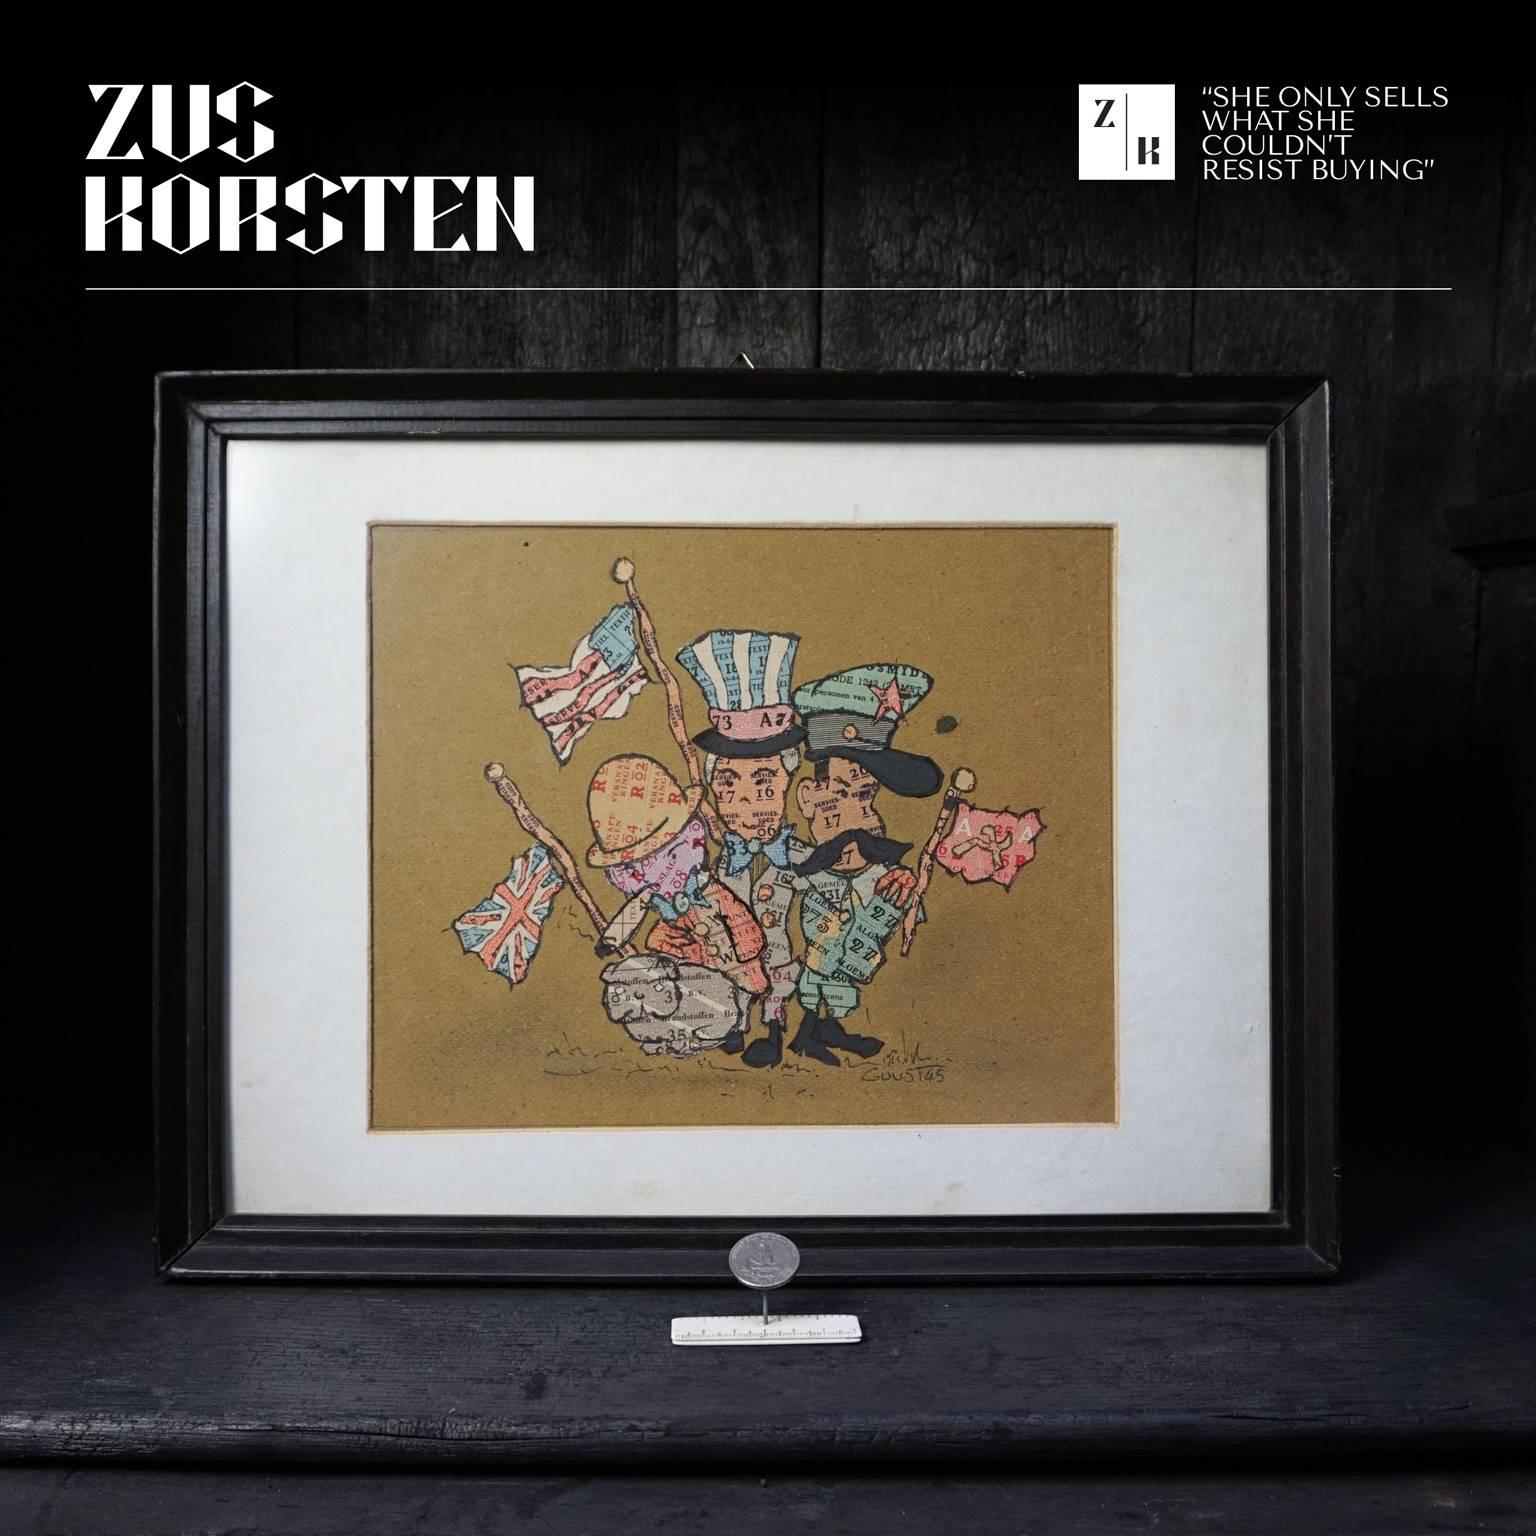 A very remarkable collection of Folk Art caricatures made of Dutch ration 'food stamps.' 

First caricature portrays a fat Hermann Go¨ring holding a ceremonial Baton. Signed 'Guust 45' (Guust is a typical mid-20th century surname).
Size: W 32 cm